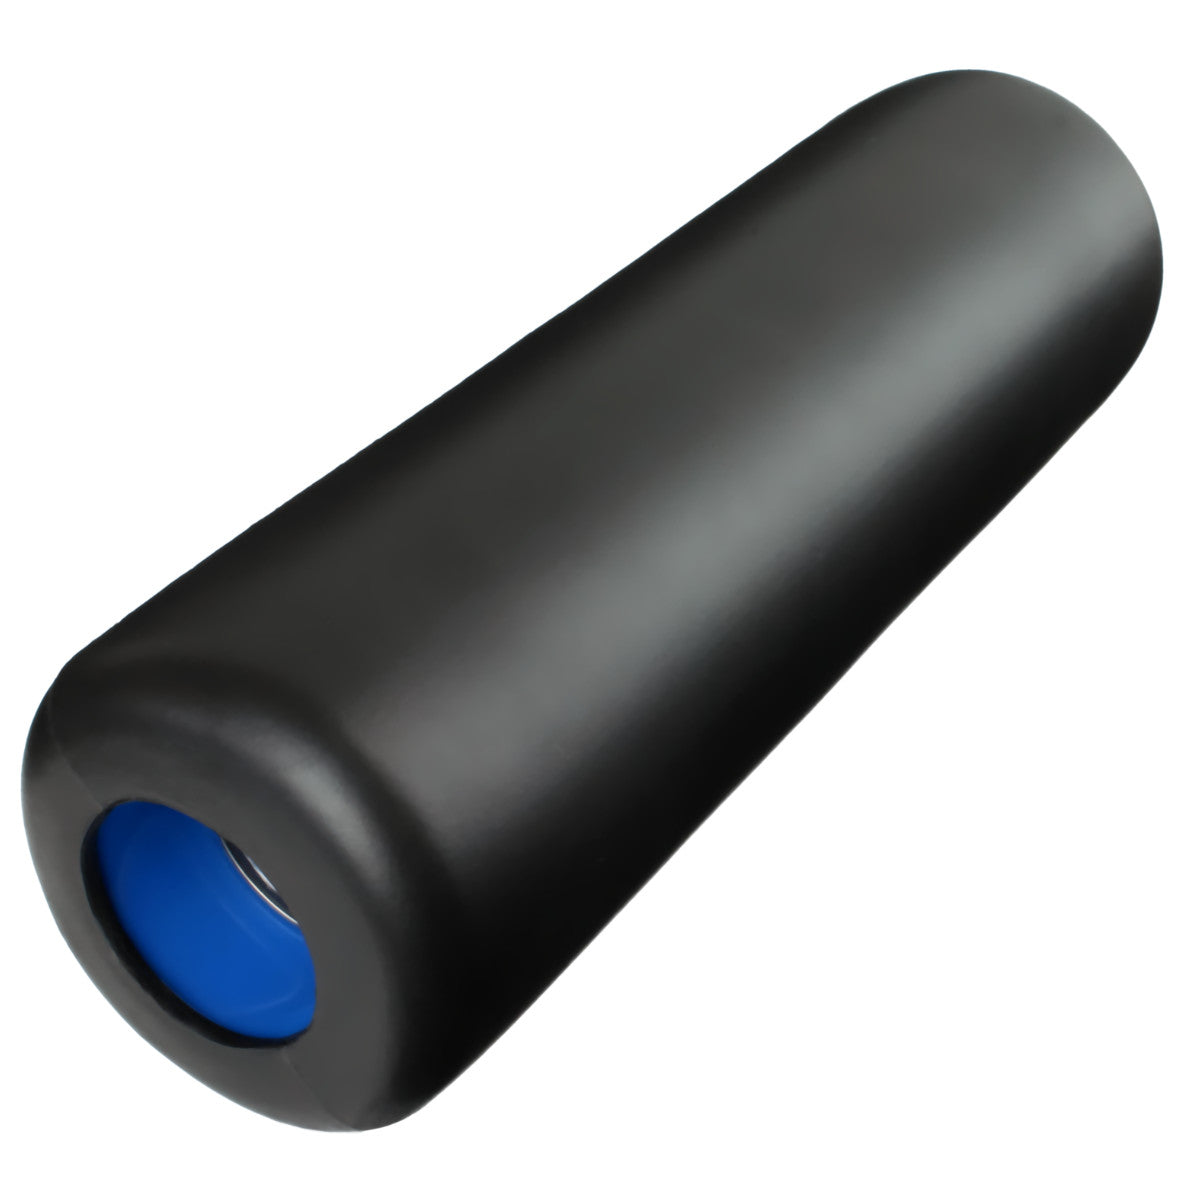 DoubleUP Smooth Soft-Density Quick-Change Muscle Roller - DoubleUP